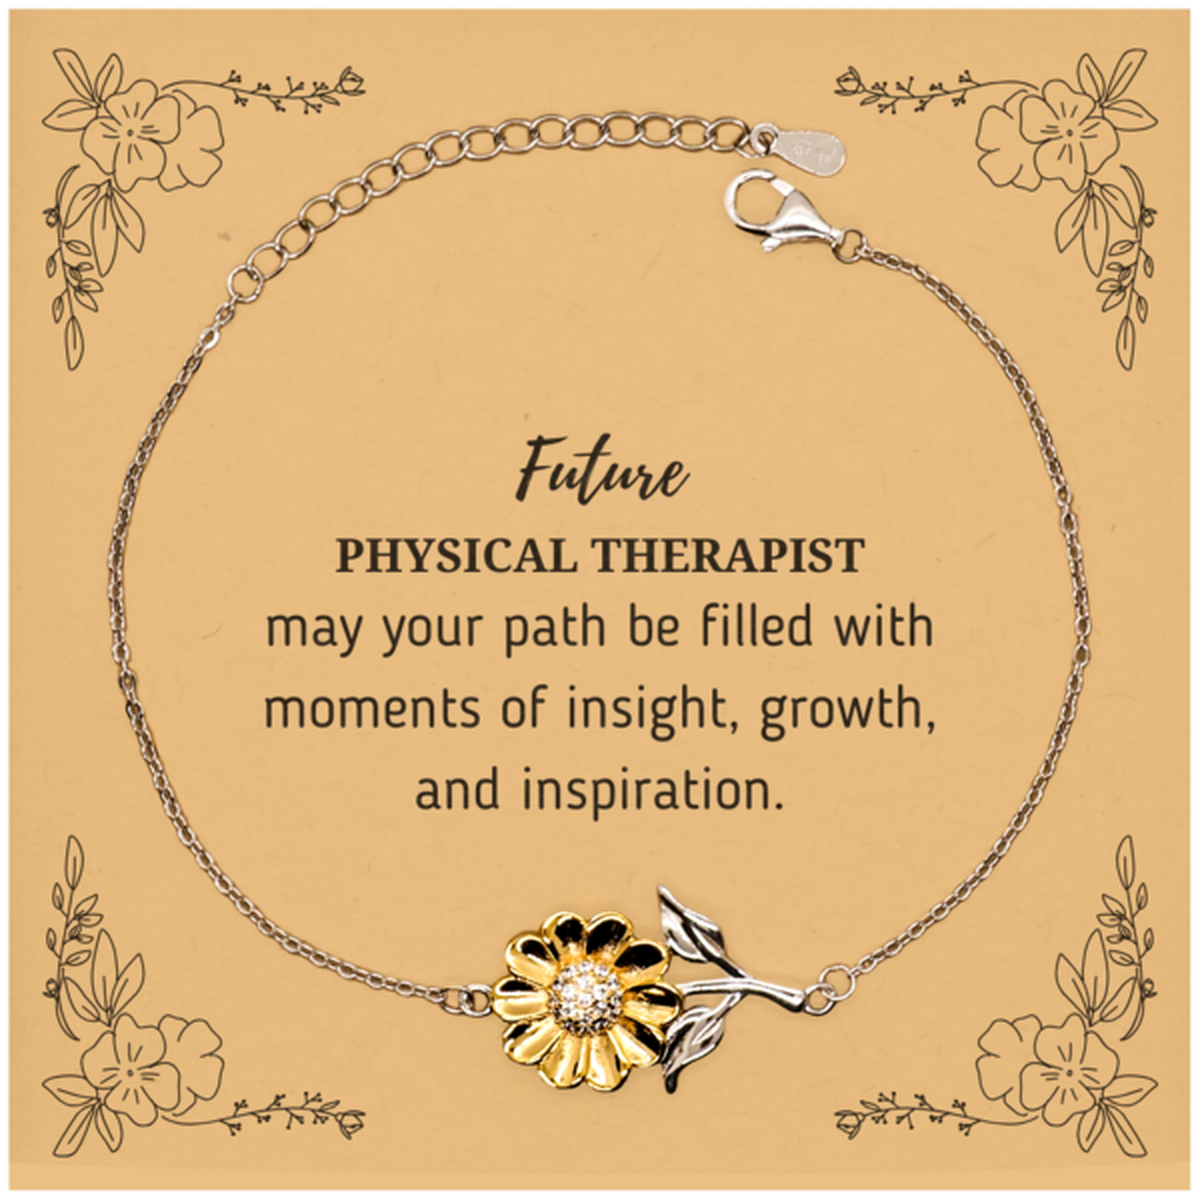 Future Physical Therapist Gifts, May your path be filled with moments of insight, Graduation Gifts for New Physical Therapist, Christmas Unique Sunflower Bracelet For Men, Women, Friends